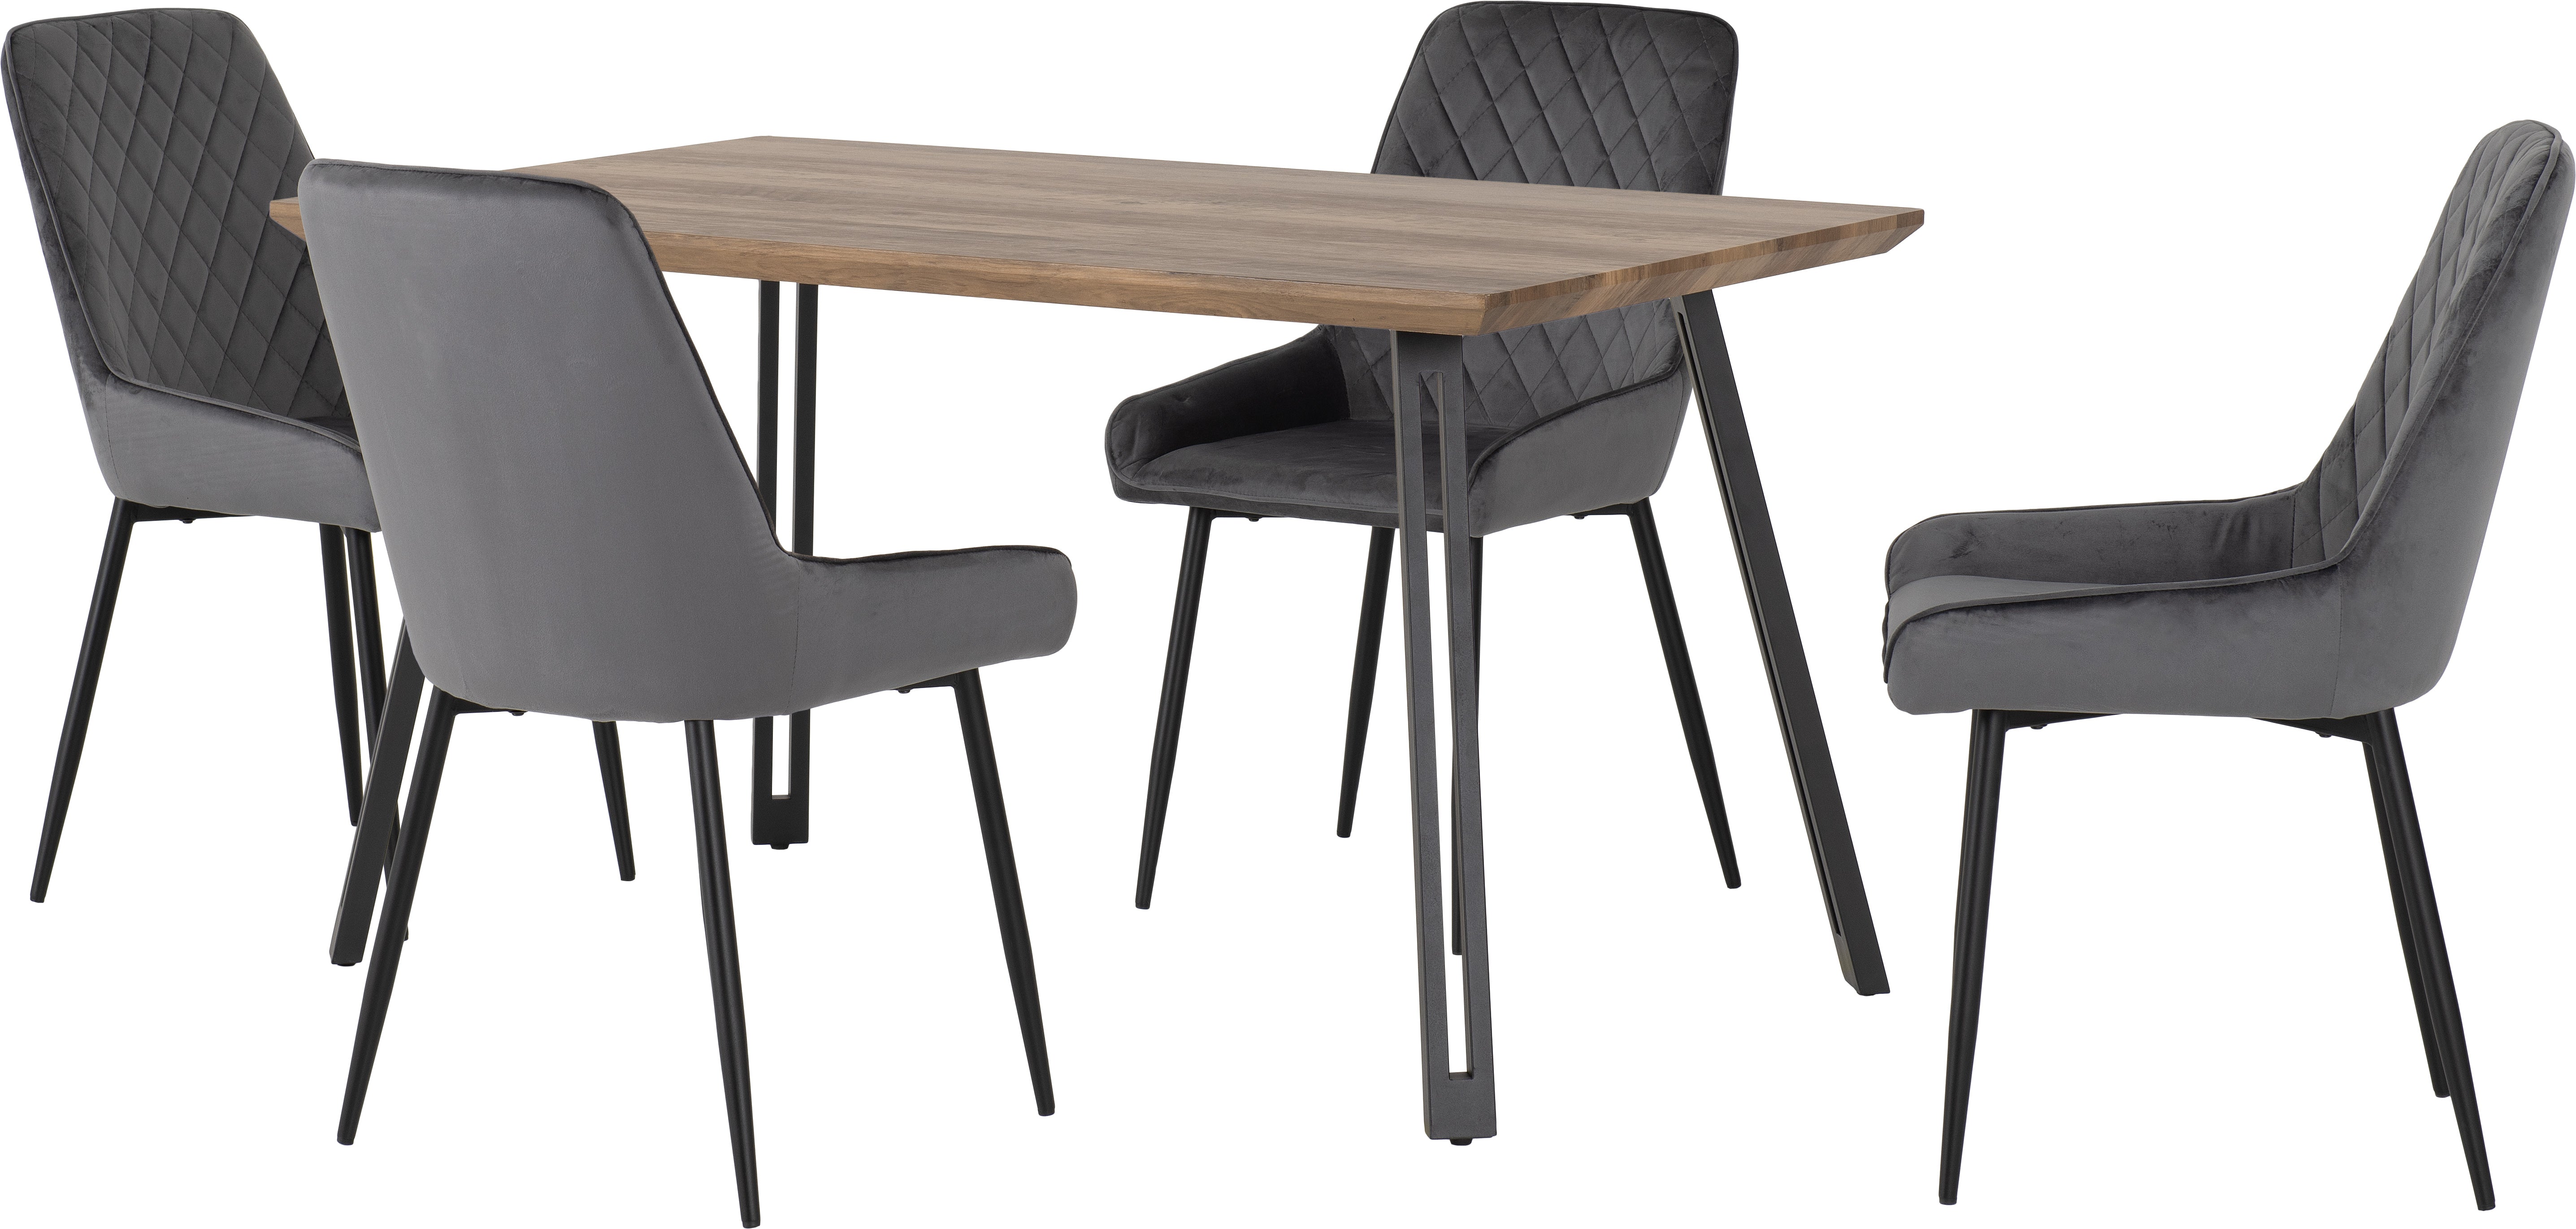 Quebec Straight Edge Dining Set with Avery Chairs